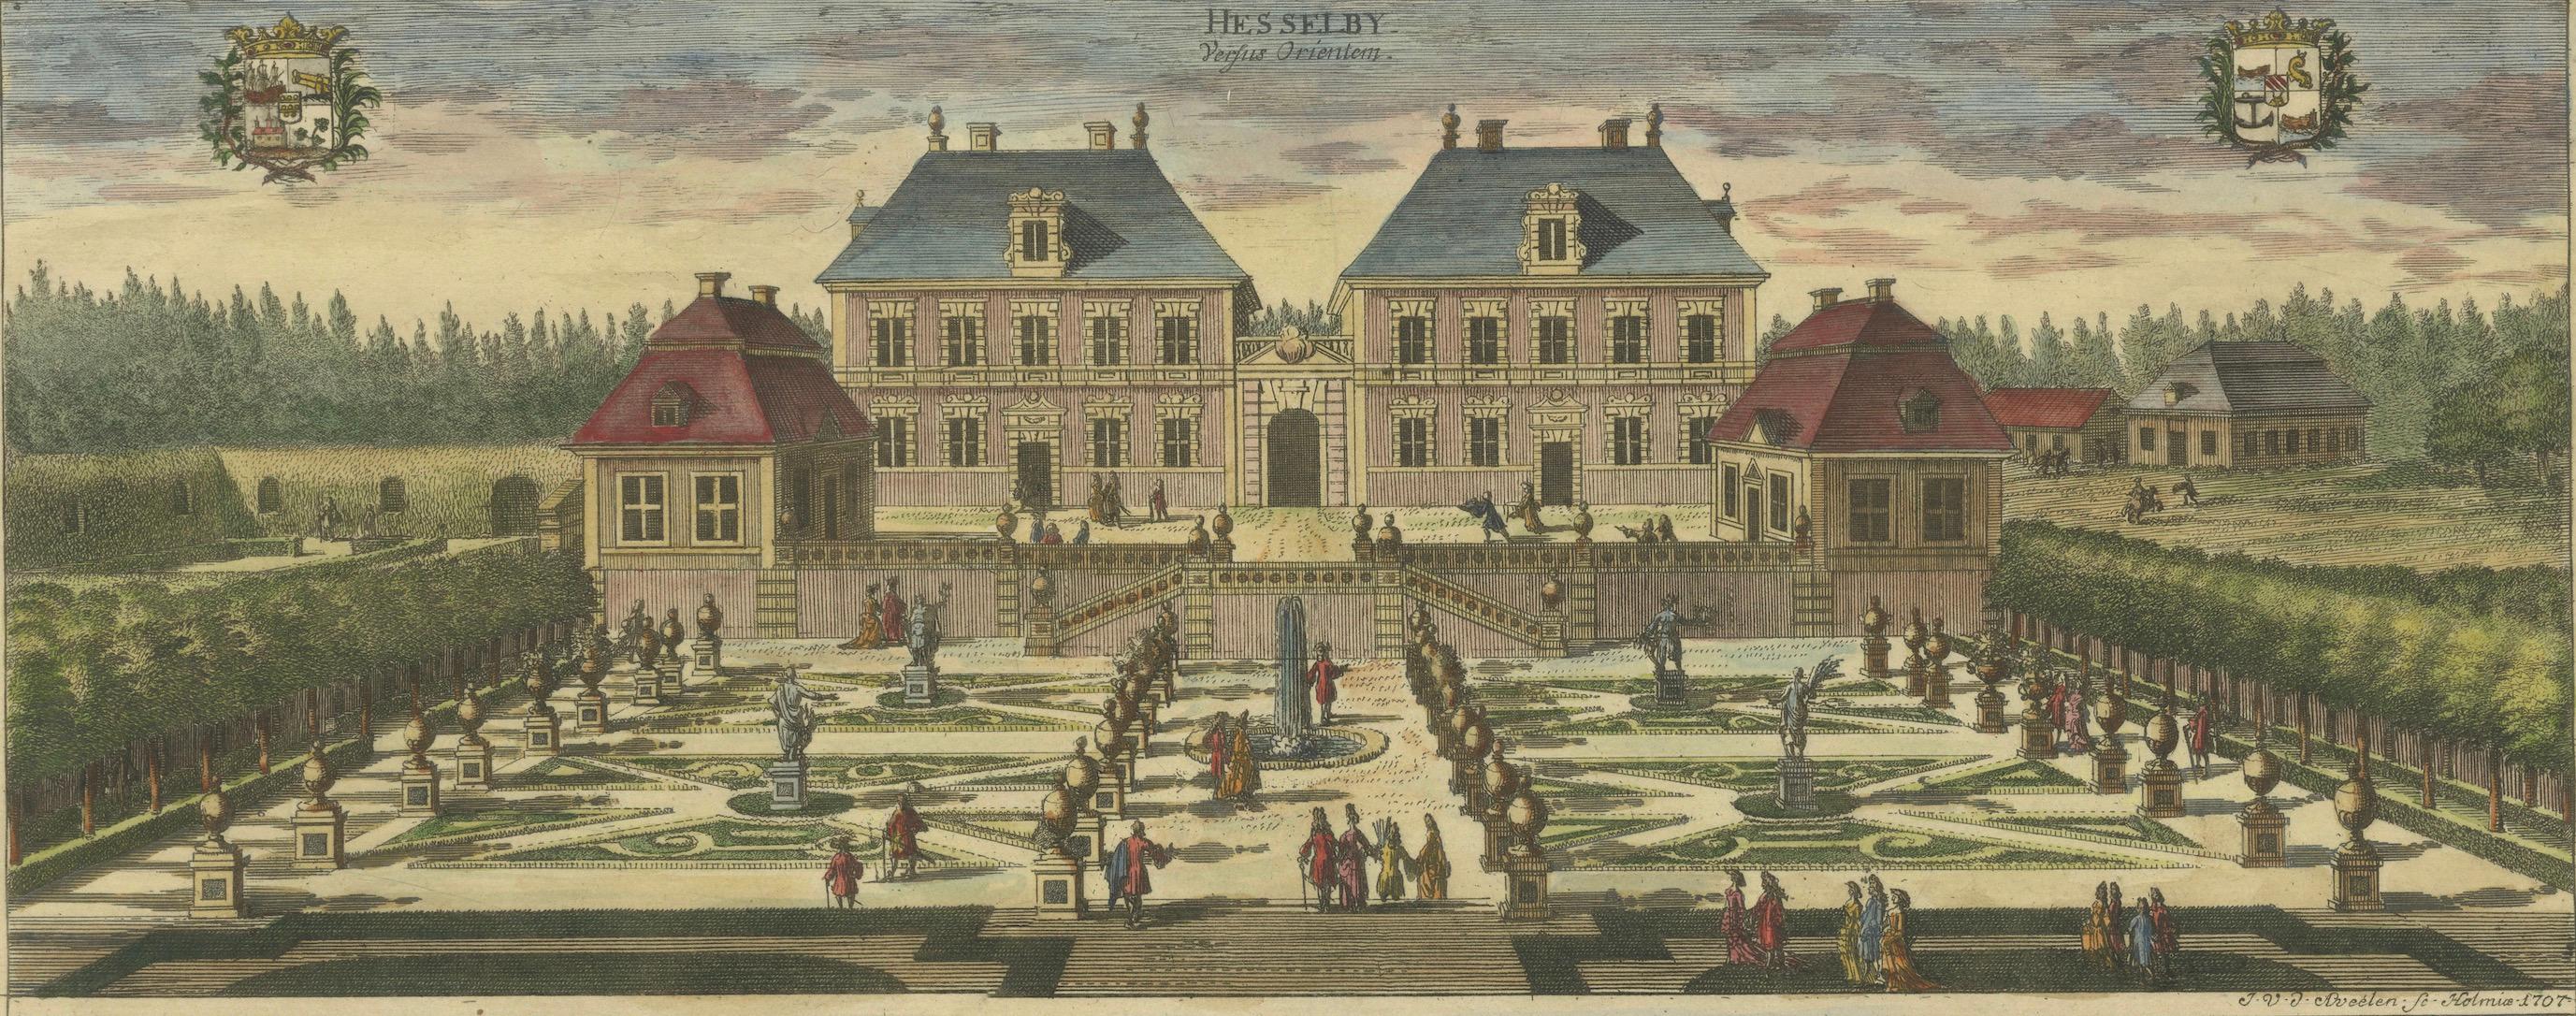 Engraved Hand-colored Views of Hesselby Castle in Stockholm, Sweden, 1707 For Sale 5